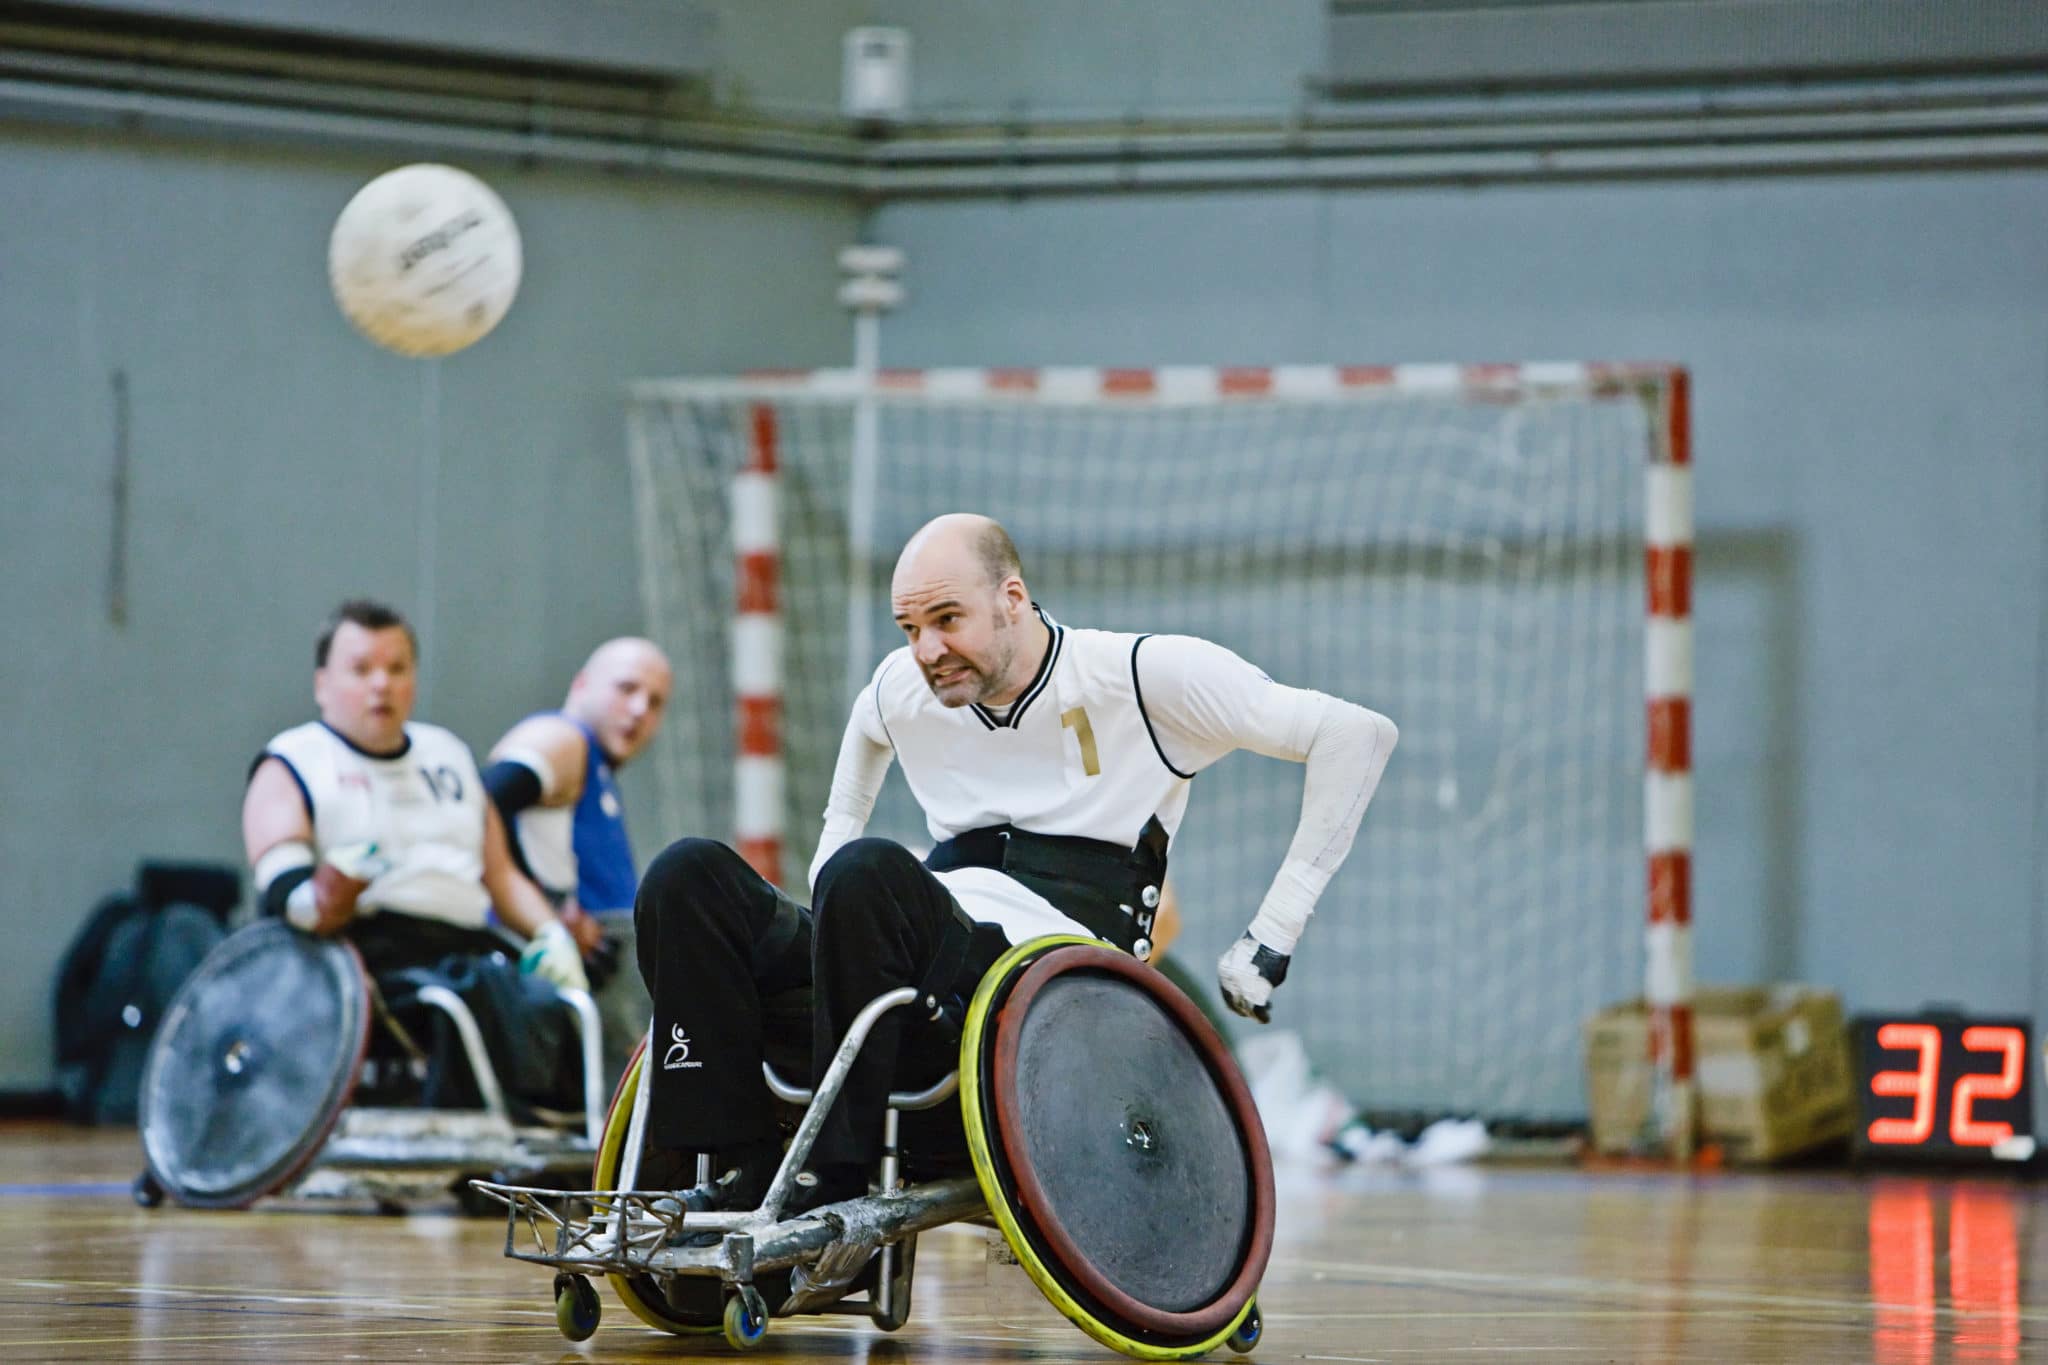 men in wheelchairs playing pararugby 2022 03 07 23 55 15 utc